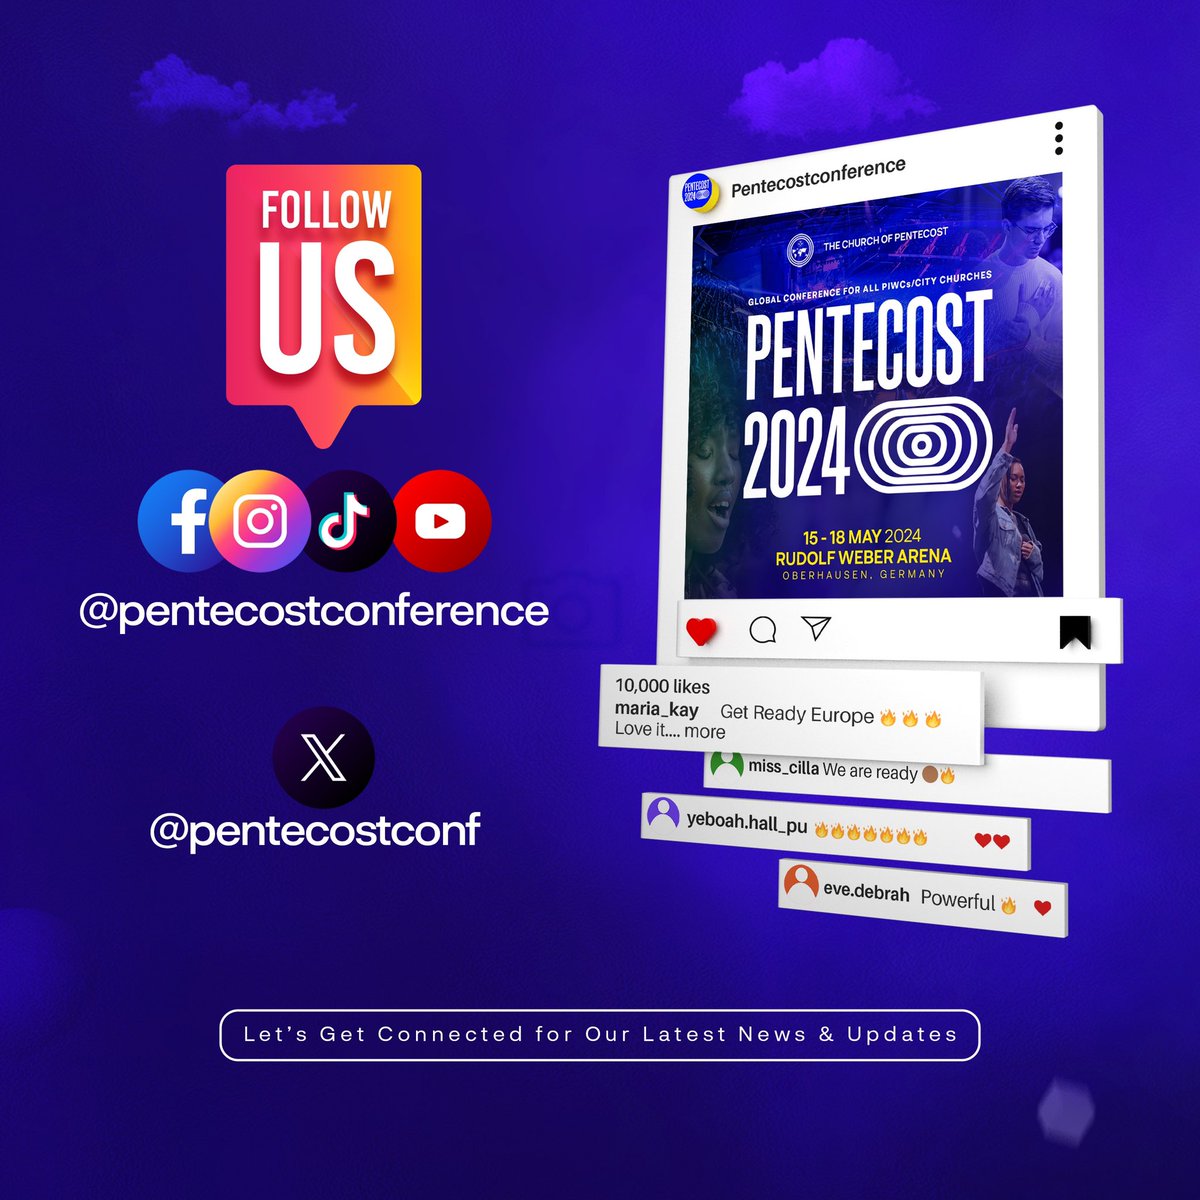 Stay connected with the Pentecost conference on social media! We don’t want you to miss out on important news and updates. Hit the follow/like/ subscribe button on Instagram, TikTok, Facebook, X, & YouTube ☺️

#PENTECOST2024 🔥🔥🔥